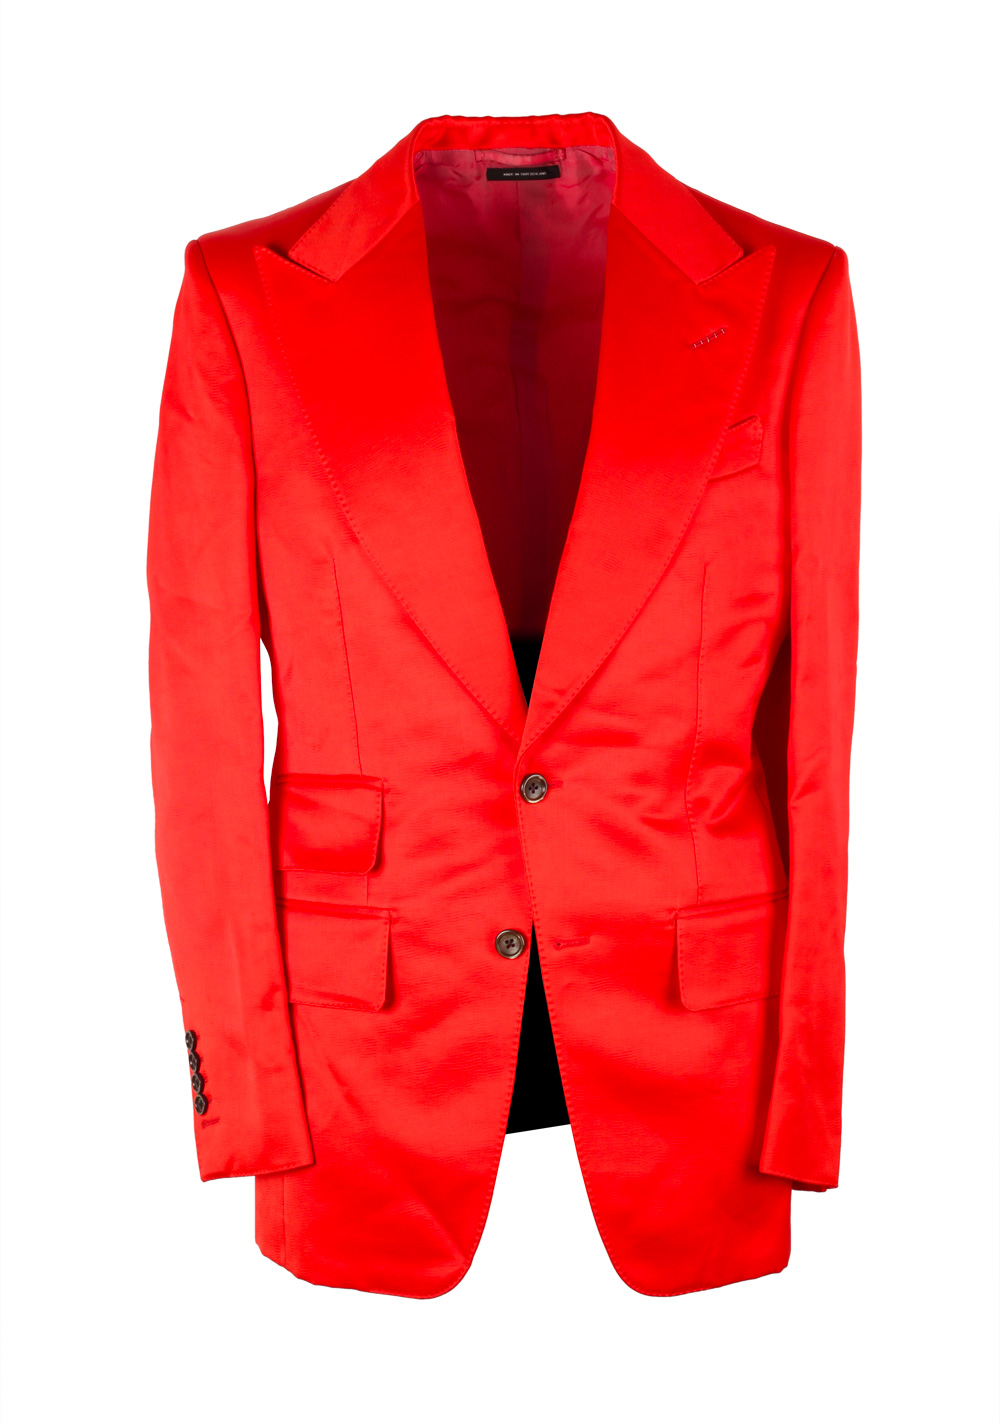 TOM FORD Basic Base M Red Suit Size 46 / 36R U.S. | Costume Limité